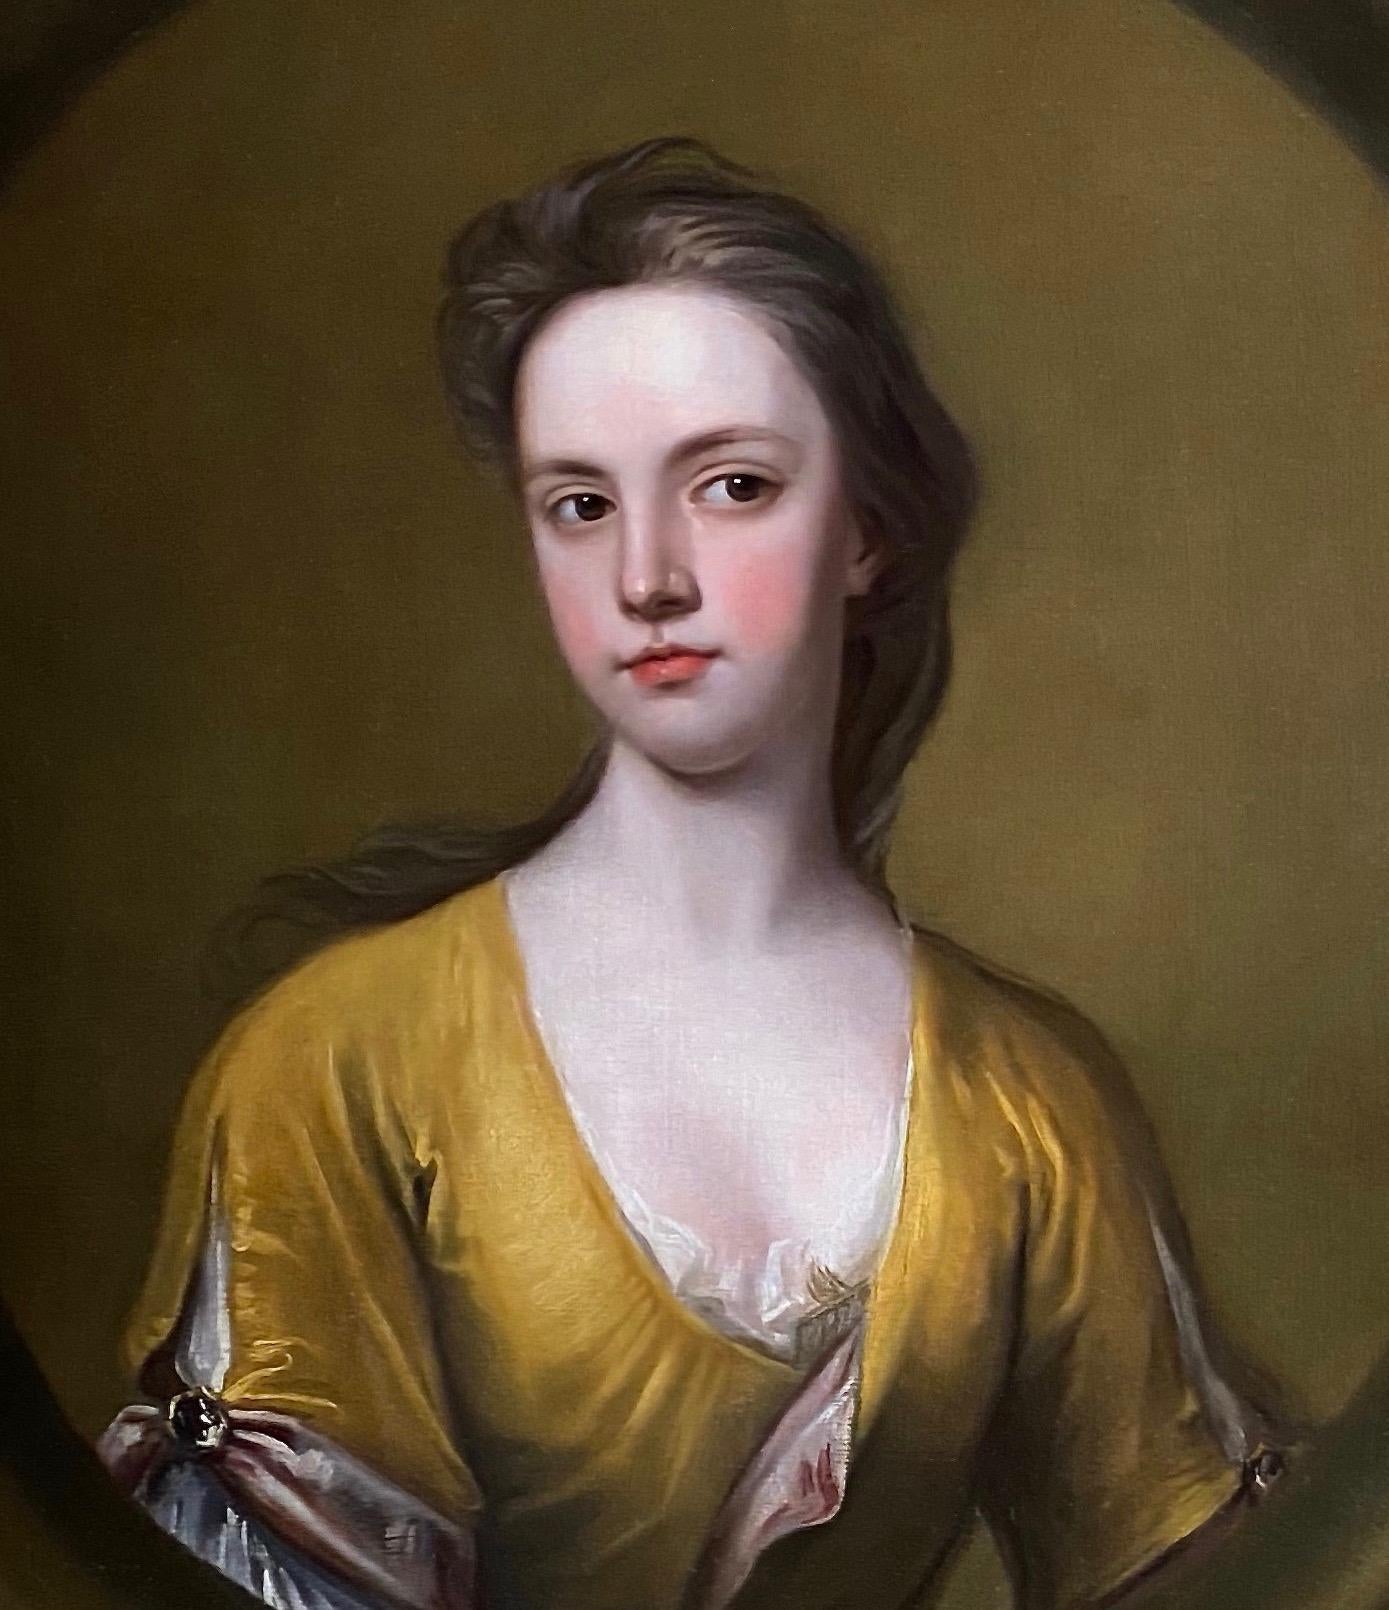 Maria Verelst Interior Painting - 18th Century English Portrait of a Lady in a Yellow Dress.